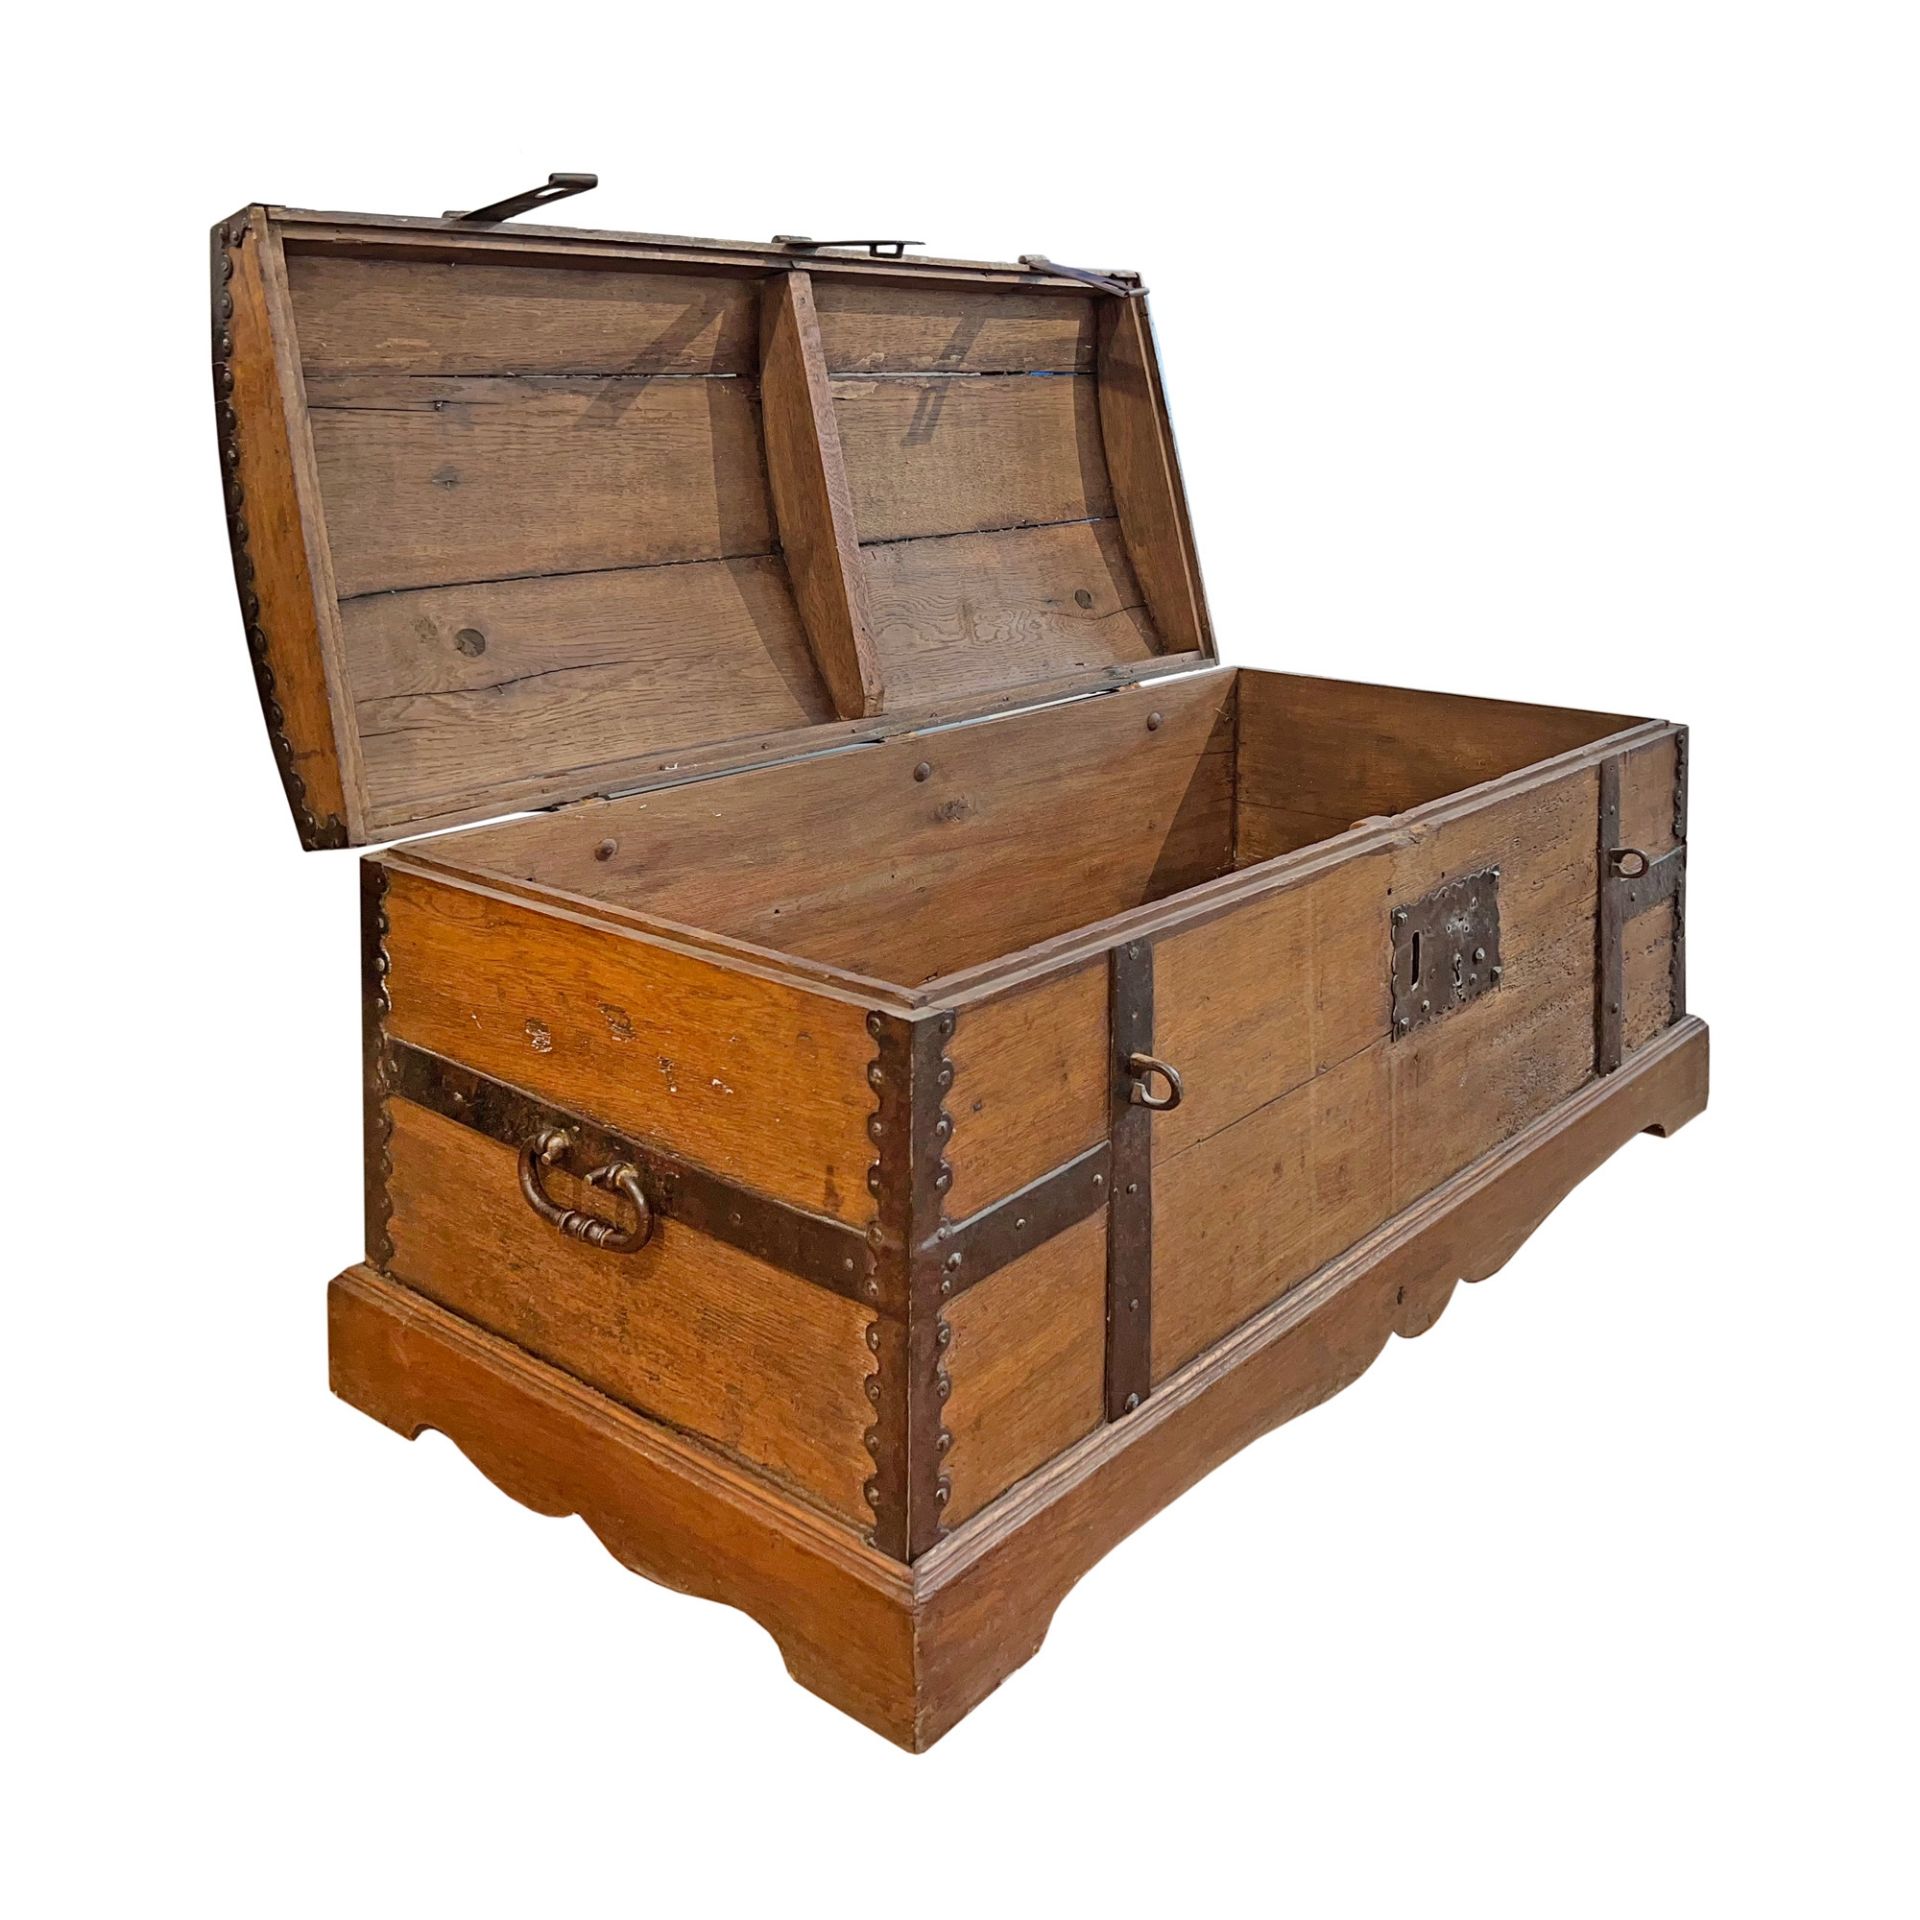 Oak chest with lock, for documents and valuable items, 19th century - Image 2 of 3